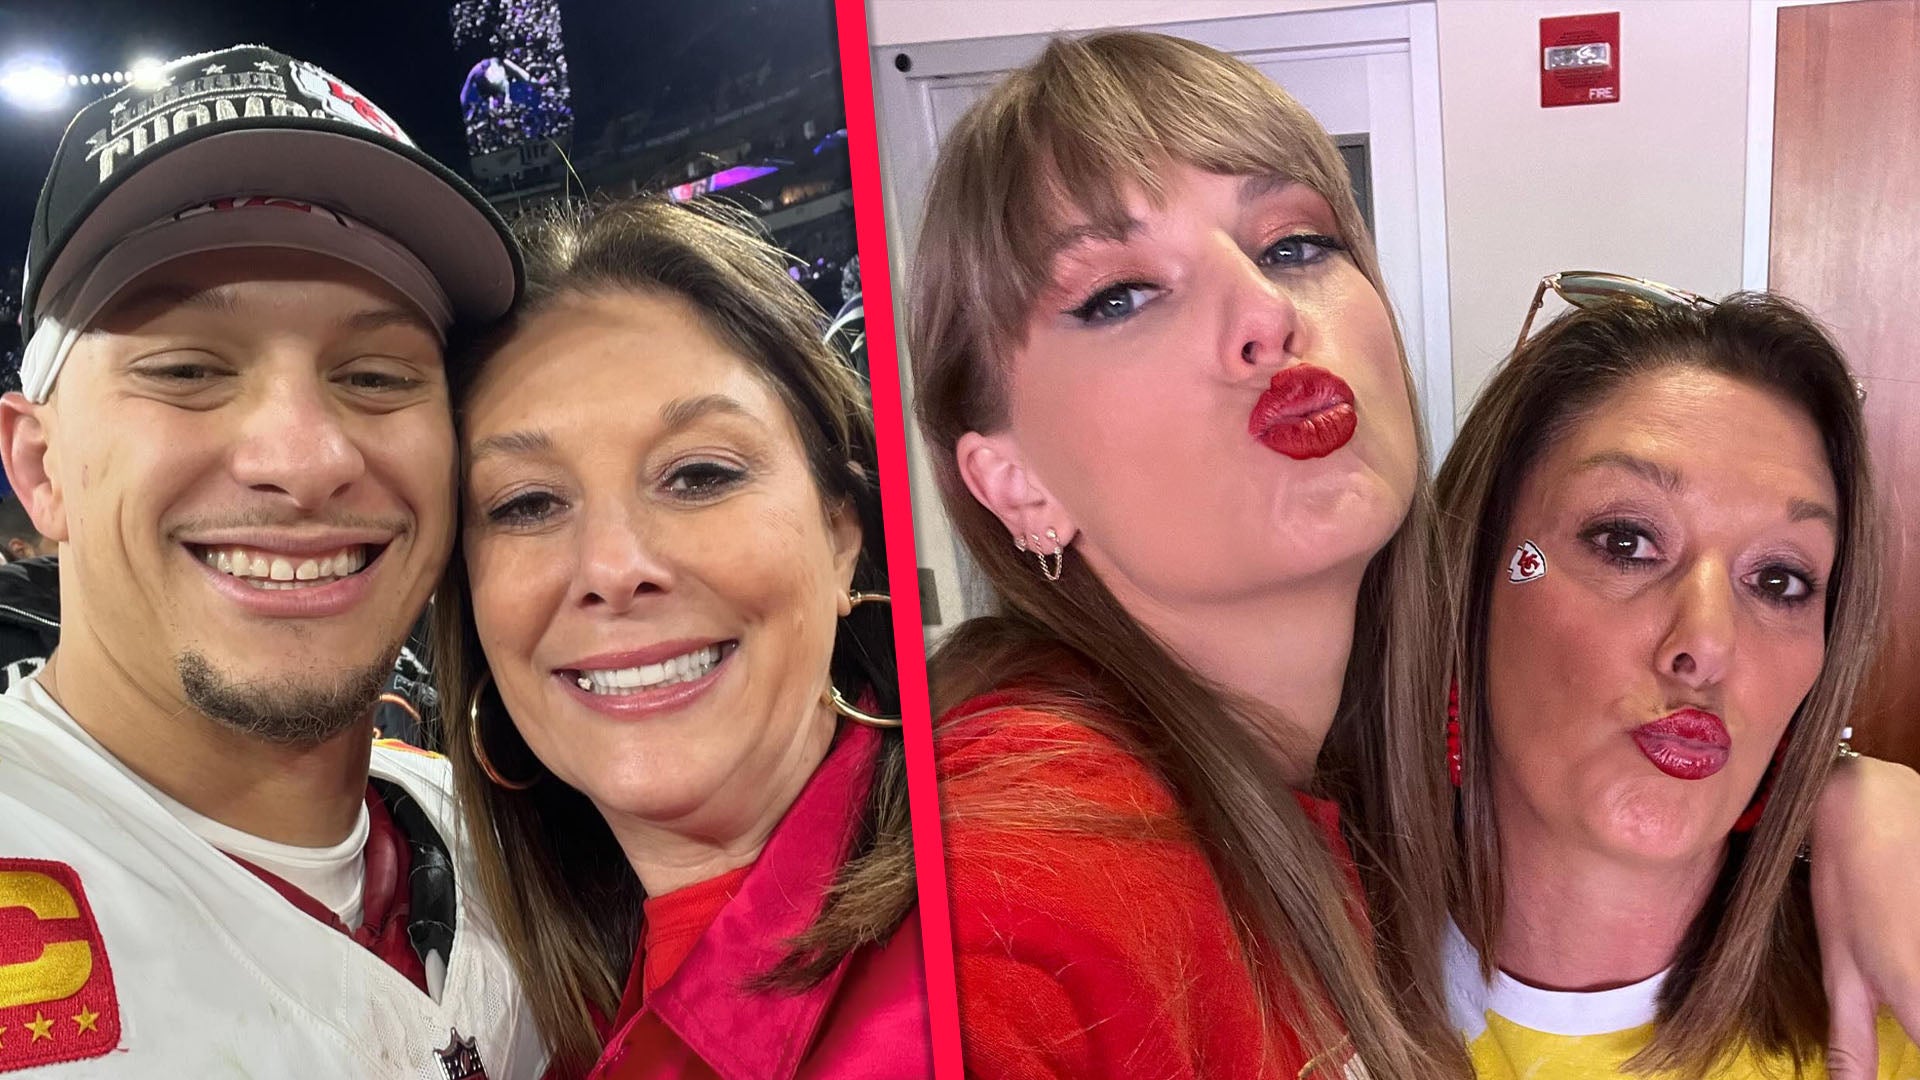 Patrick Mahomes' Mom Praises Taylor Swift Over Making Fans Feel Extra Special